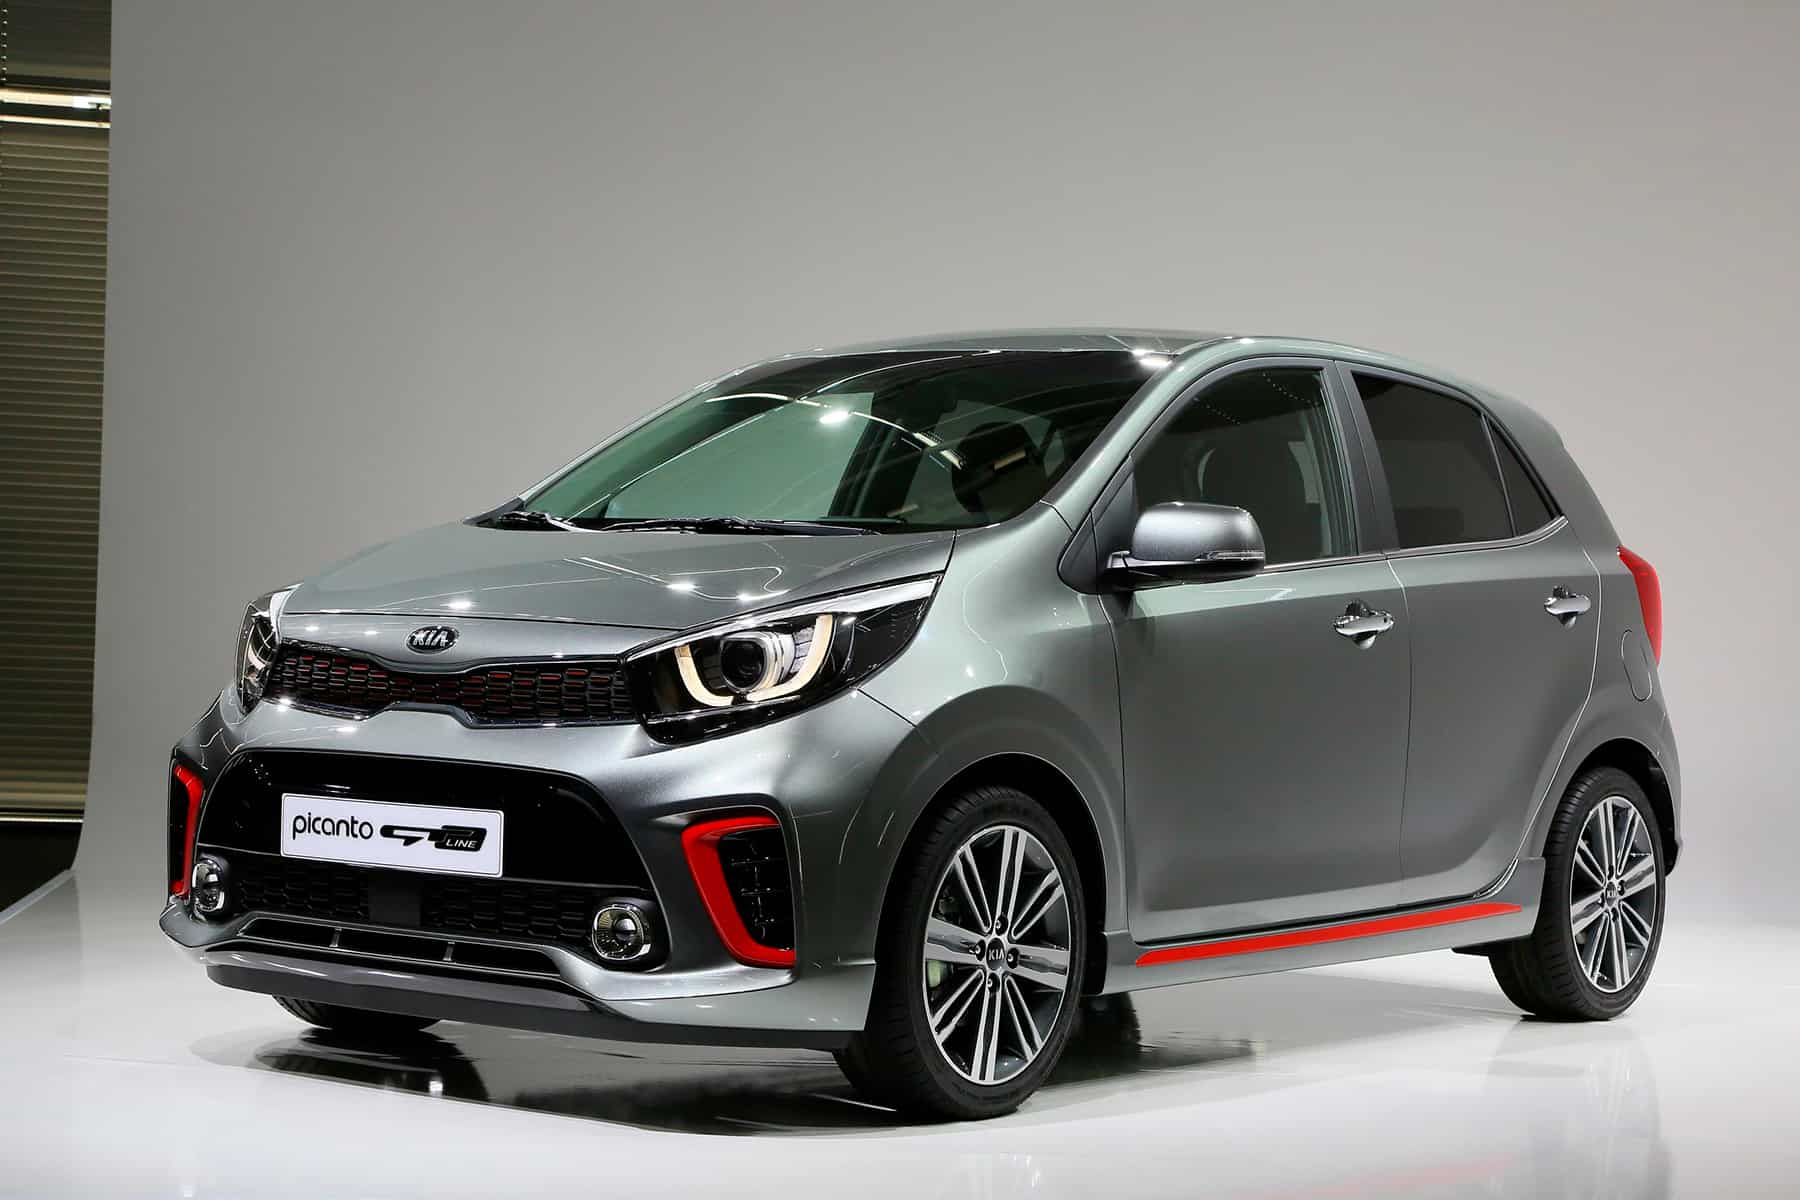 Kia Picanto Car Review Why Should You Buy The Car Guy by Bob Aldons